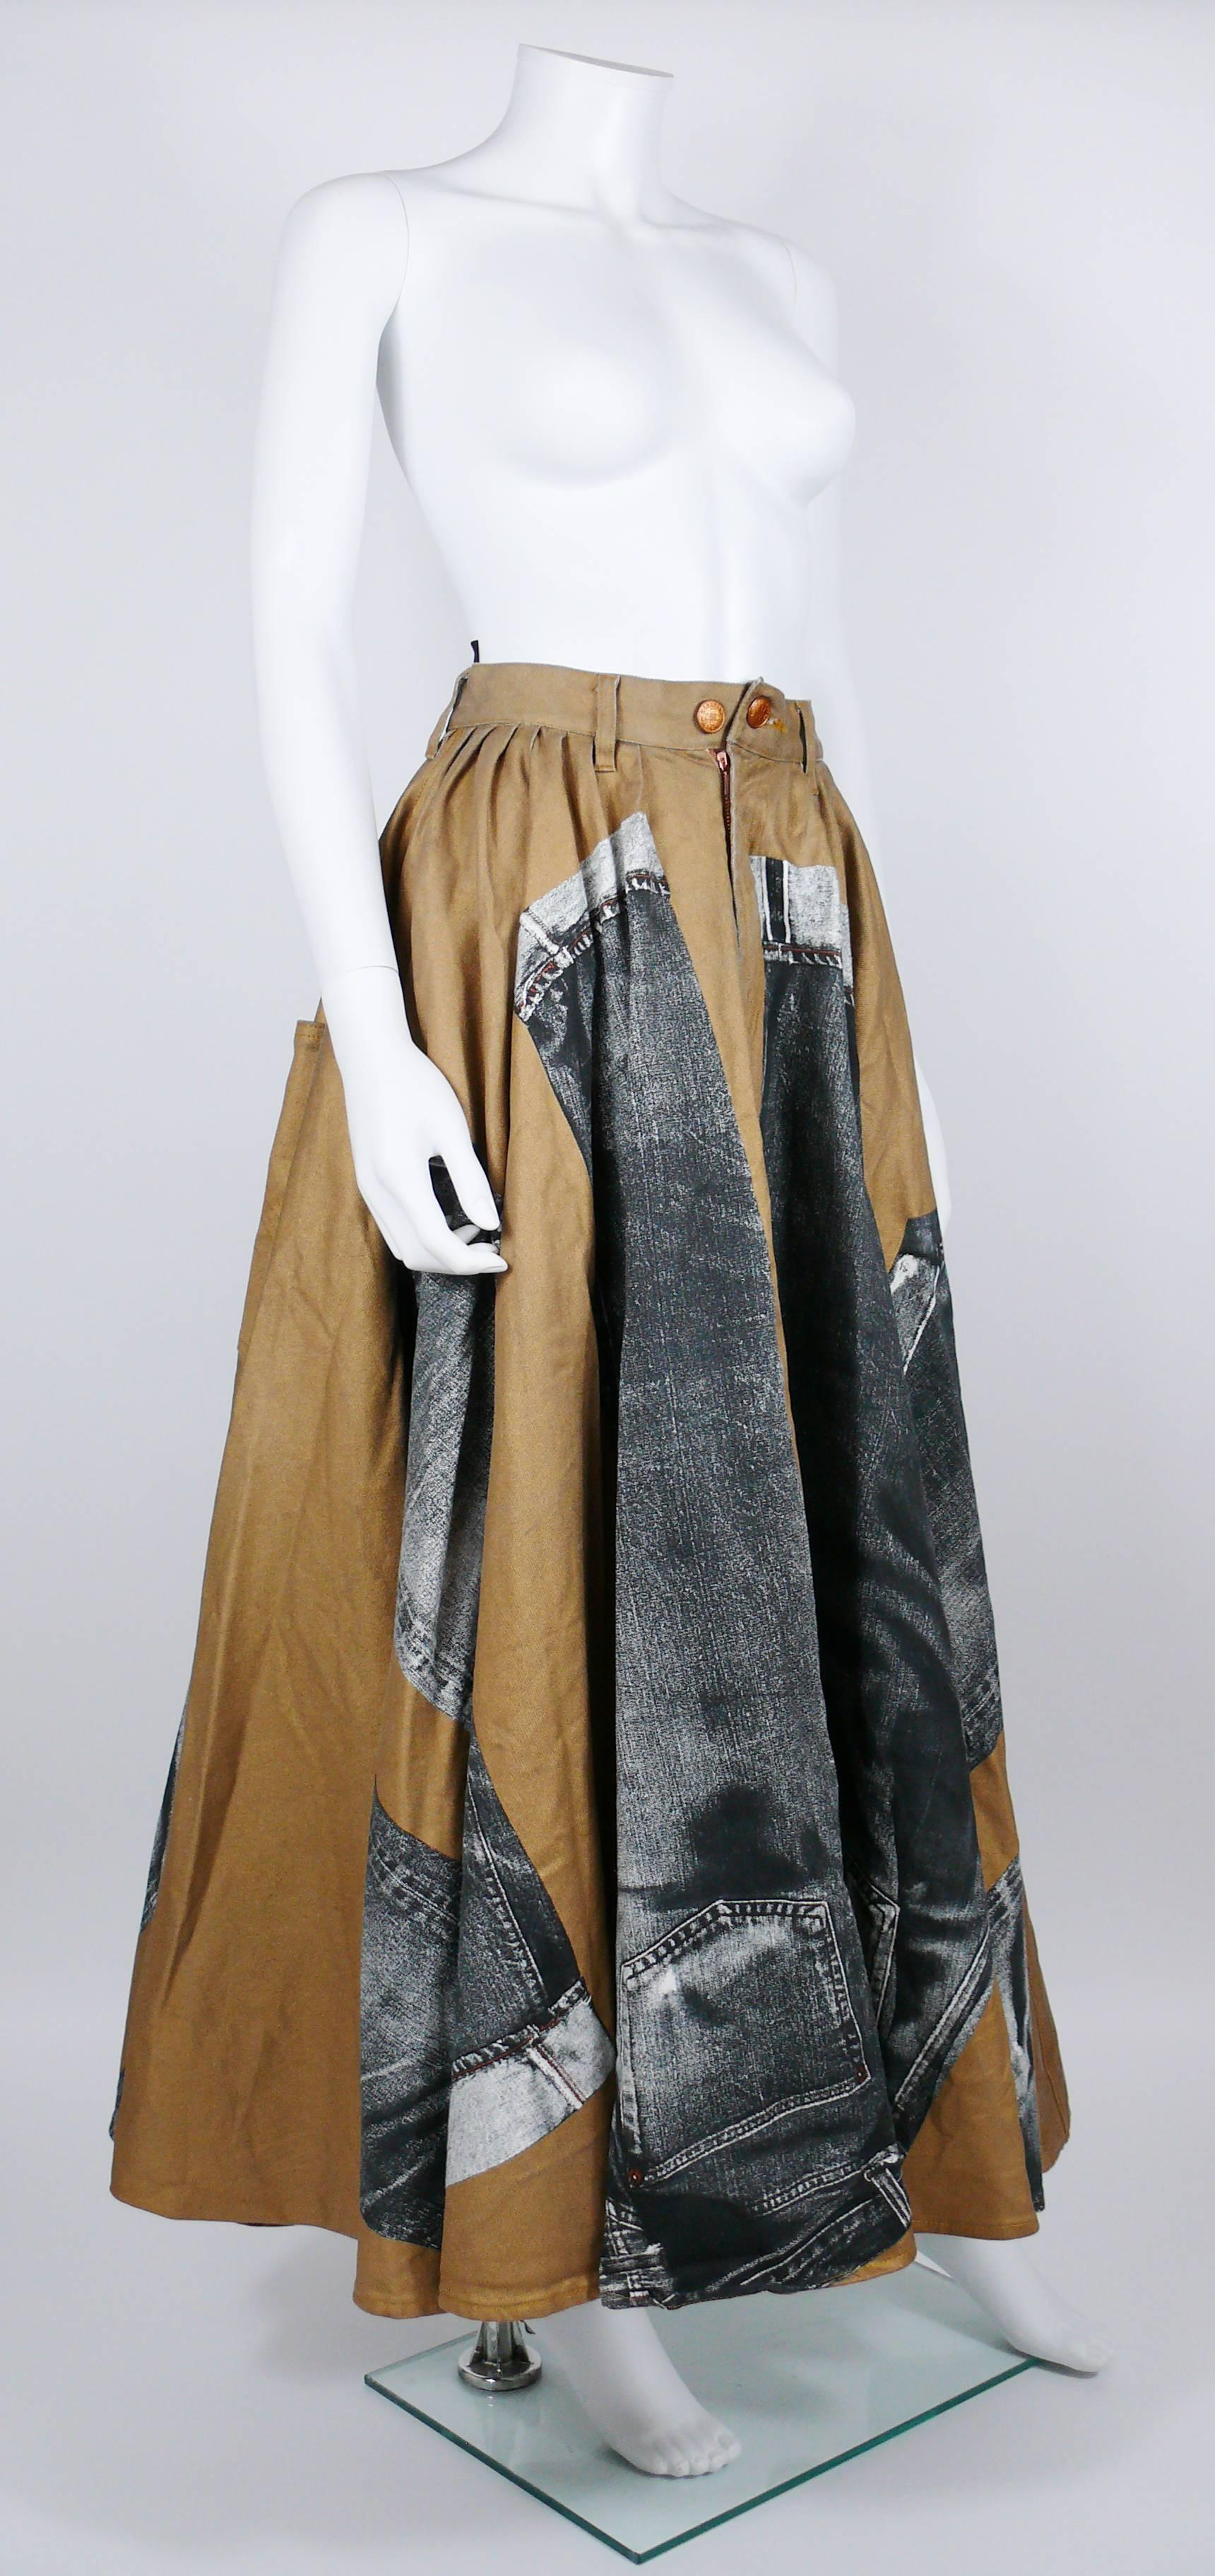 JEAN PAUL GAULTIER vintage trompe-l'oeil denim circle skirt in a rare gold-bronze color version with black & white jeans prints.

Massive.
Floor length.
Front zip fastening and buttoning.
Two large back pockets.
Has weight on it !

Label reads